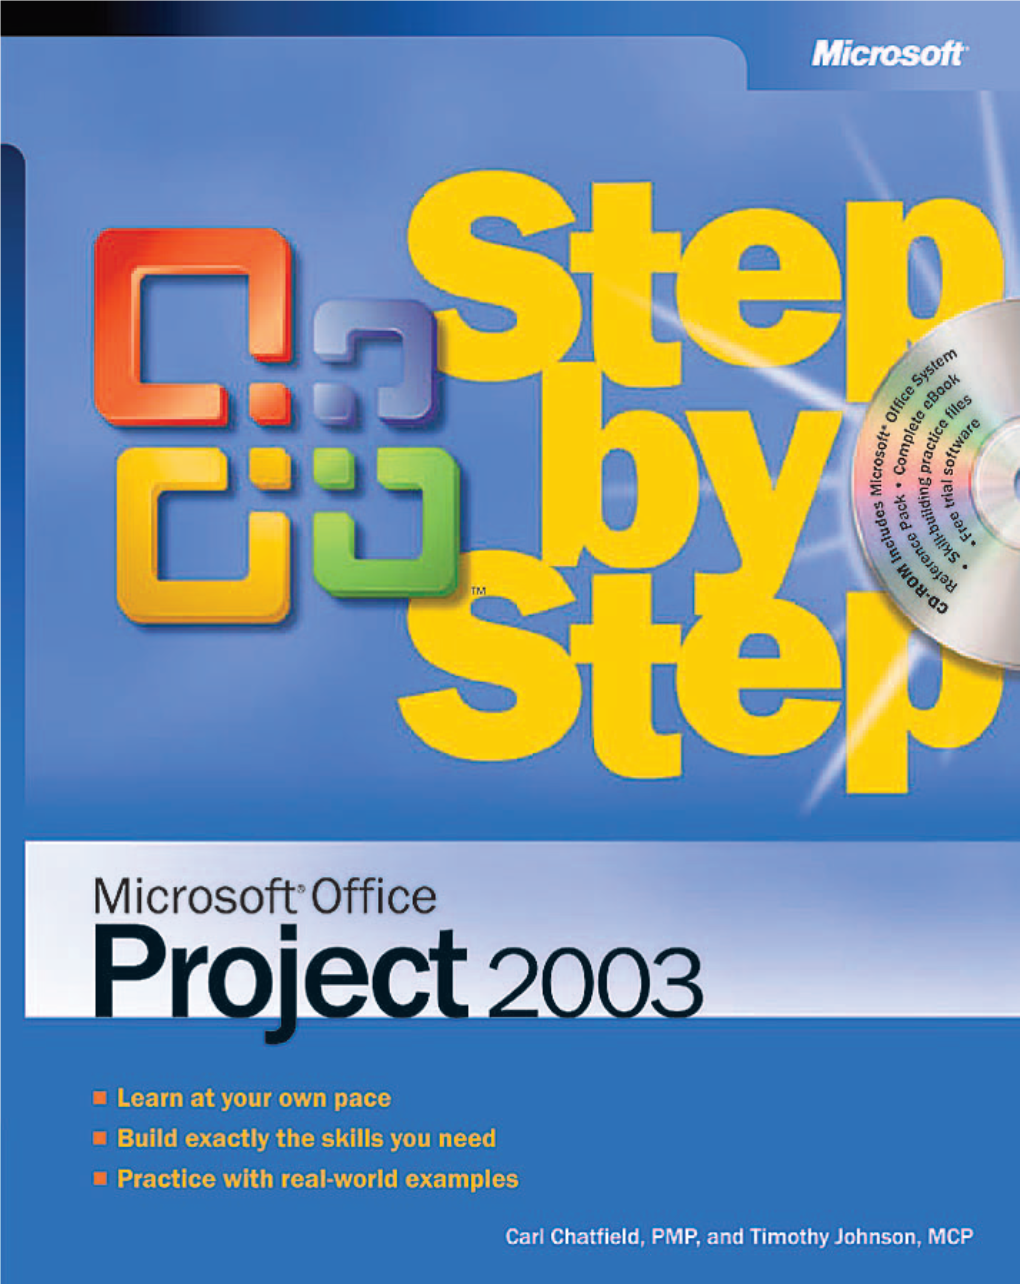 Microsoft Office Project 2003 Step by Step Ebook